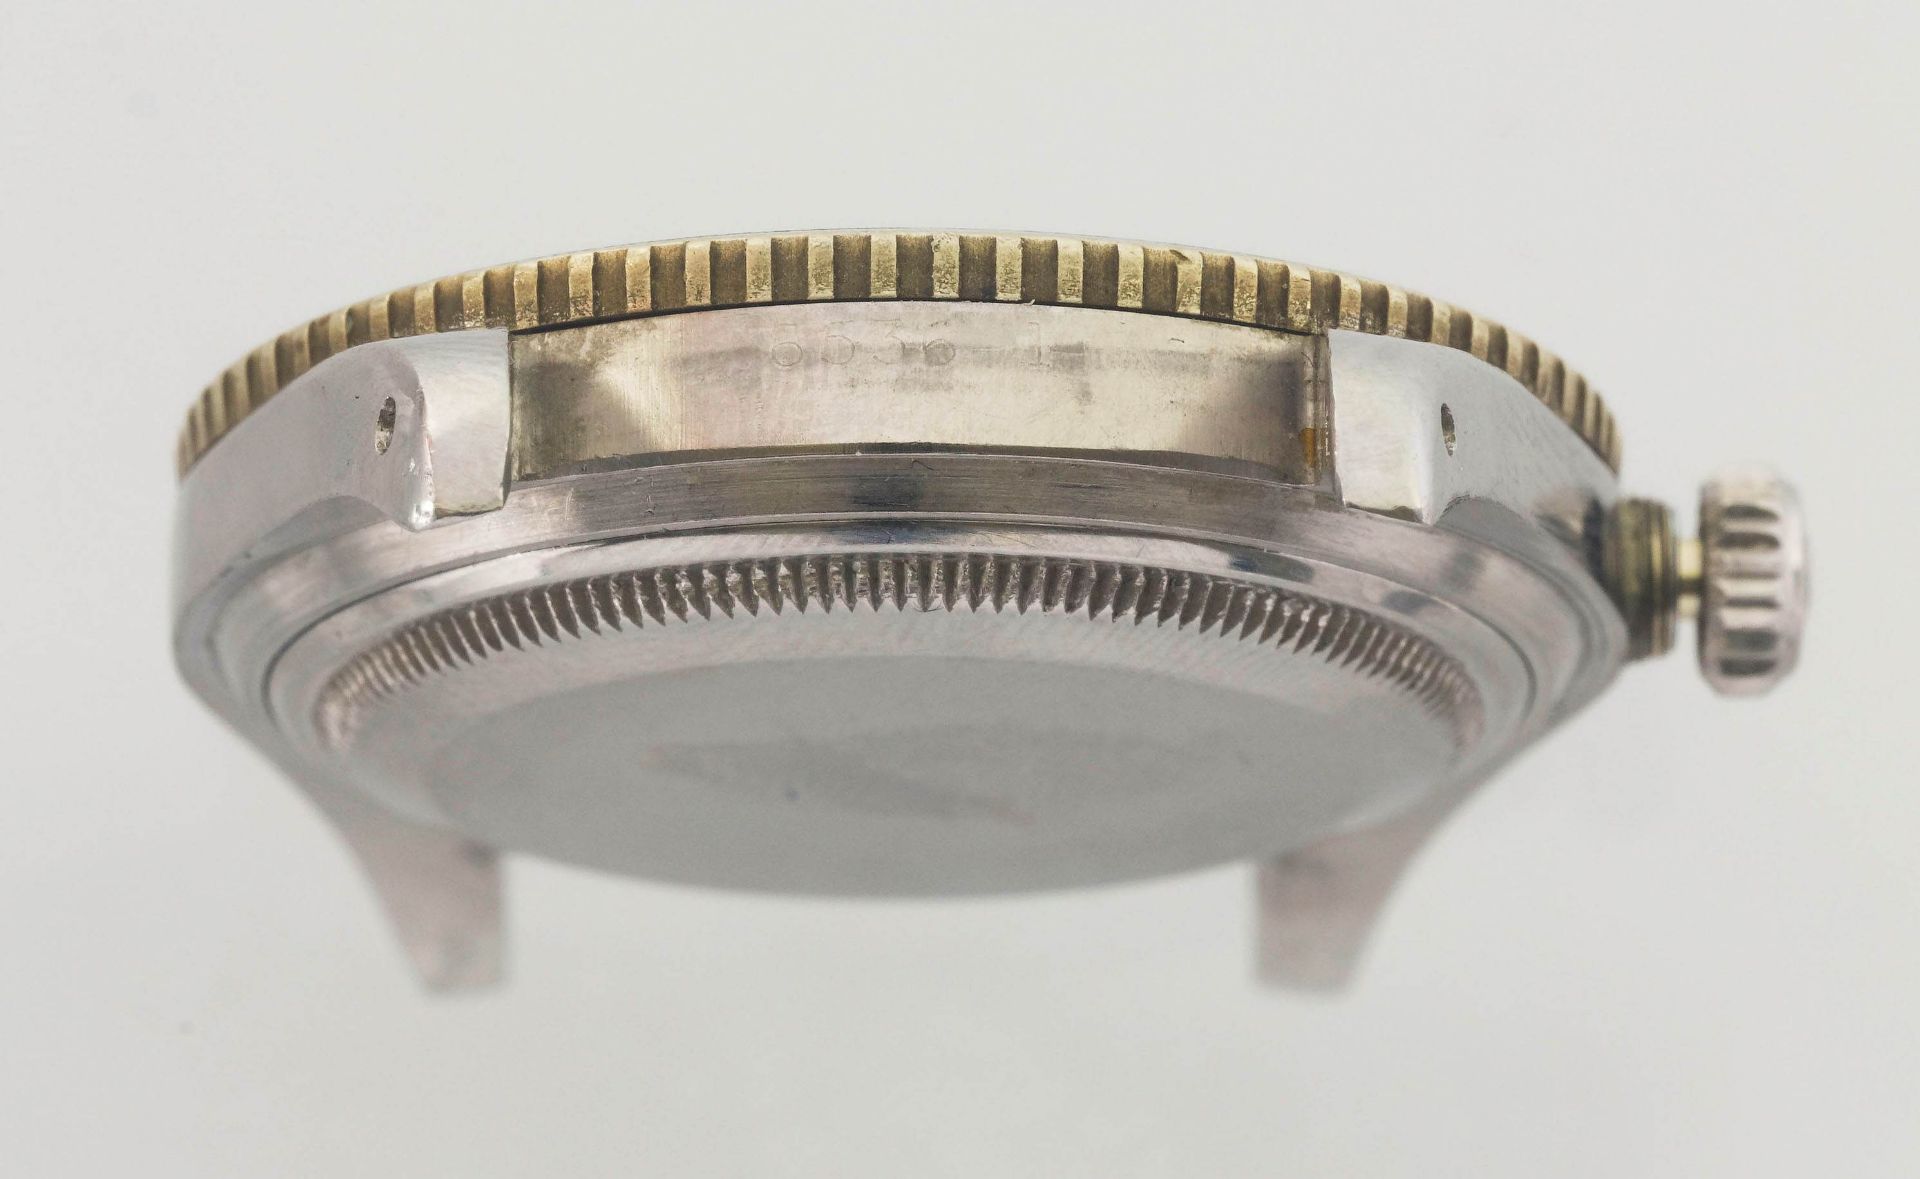 Rolex, very rare and early Submariner, ca. 1957. - Image 6 of 8